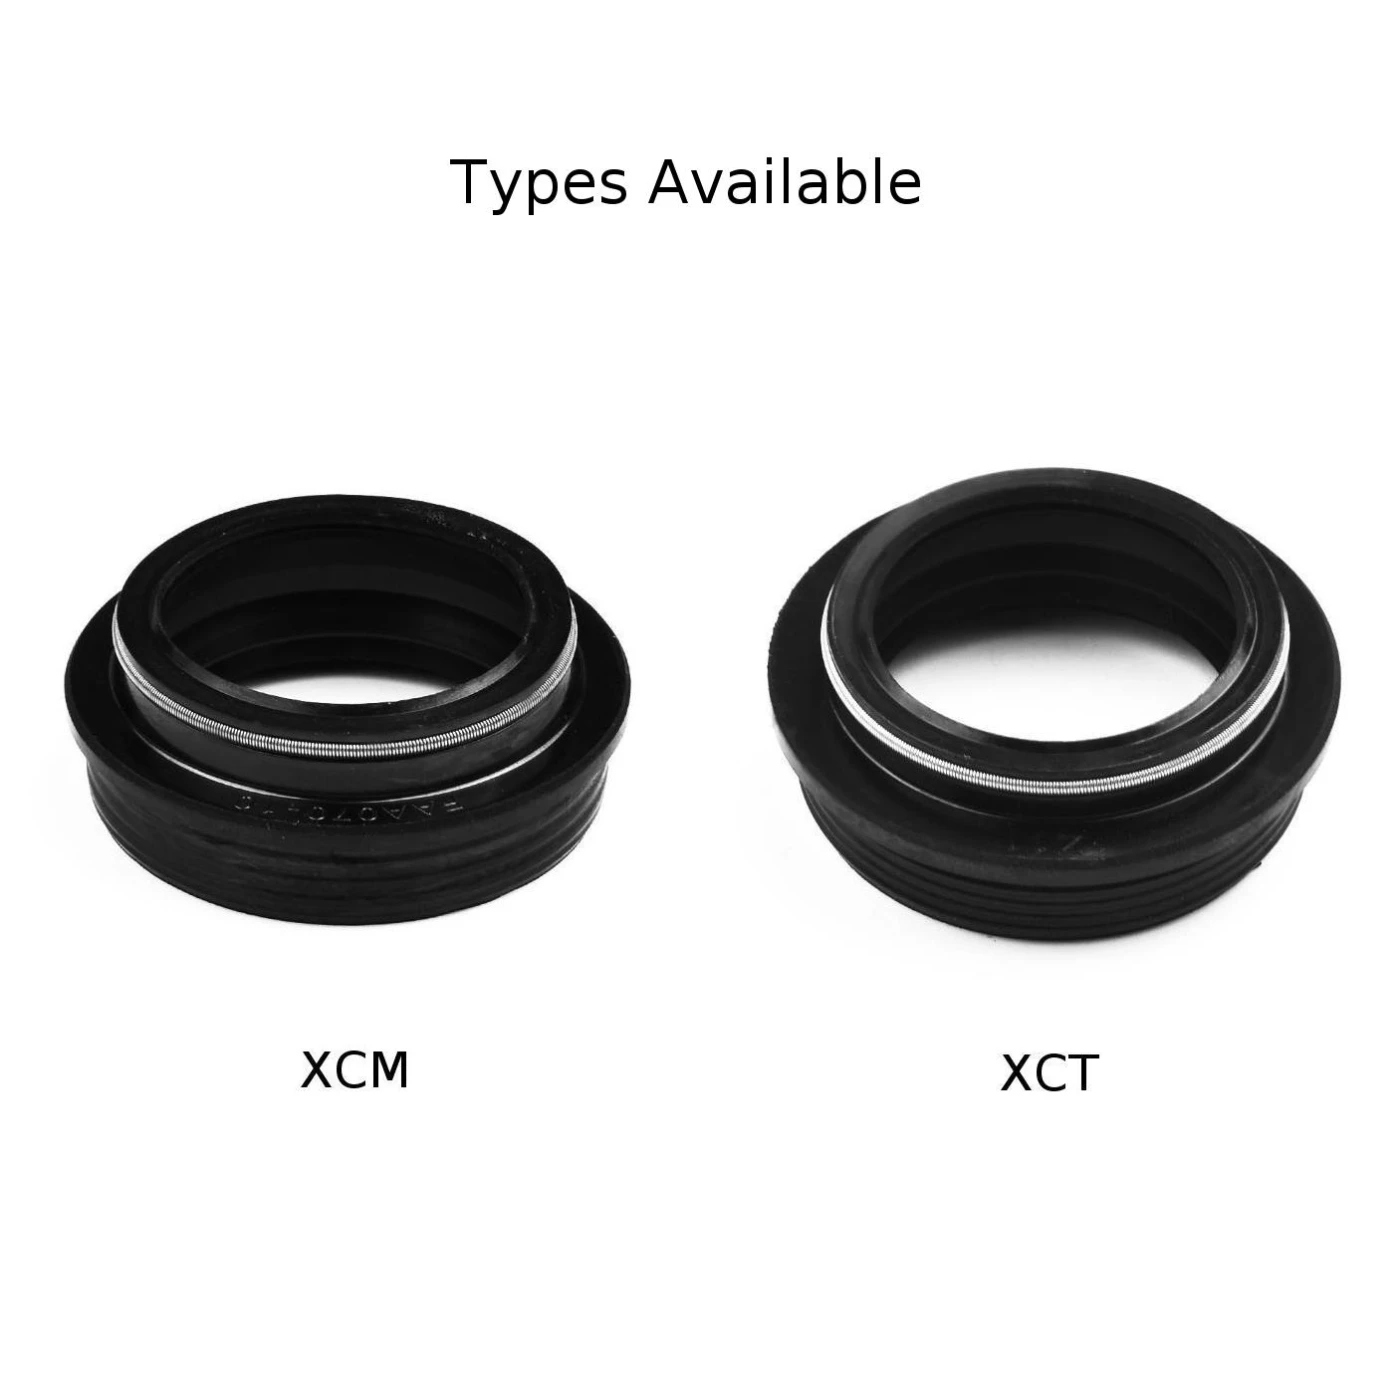 1pc Bicycle Suspension Fork Dust Seal Oil Seal For SR Suntour XCT/XCM Front Fork Pipe Diameter 30mm/28mm Rubber Cycling Parts